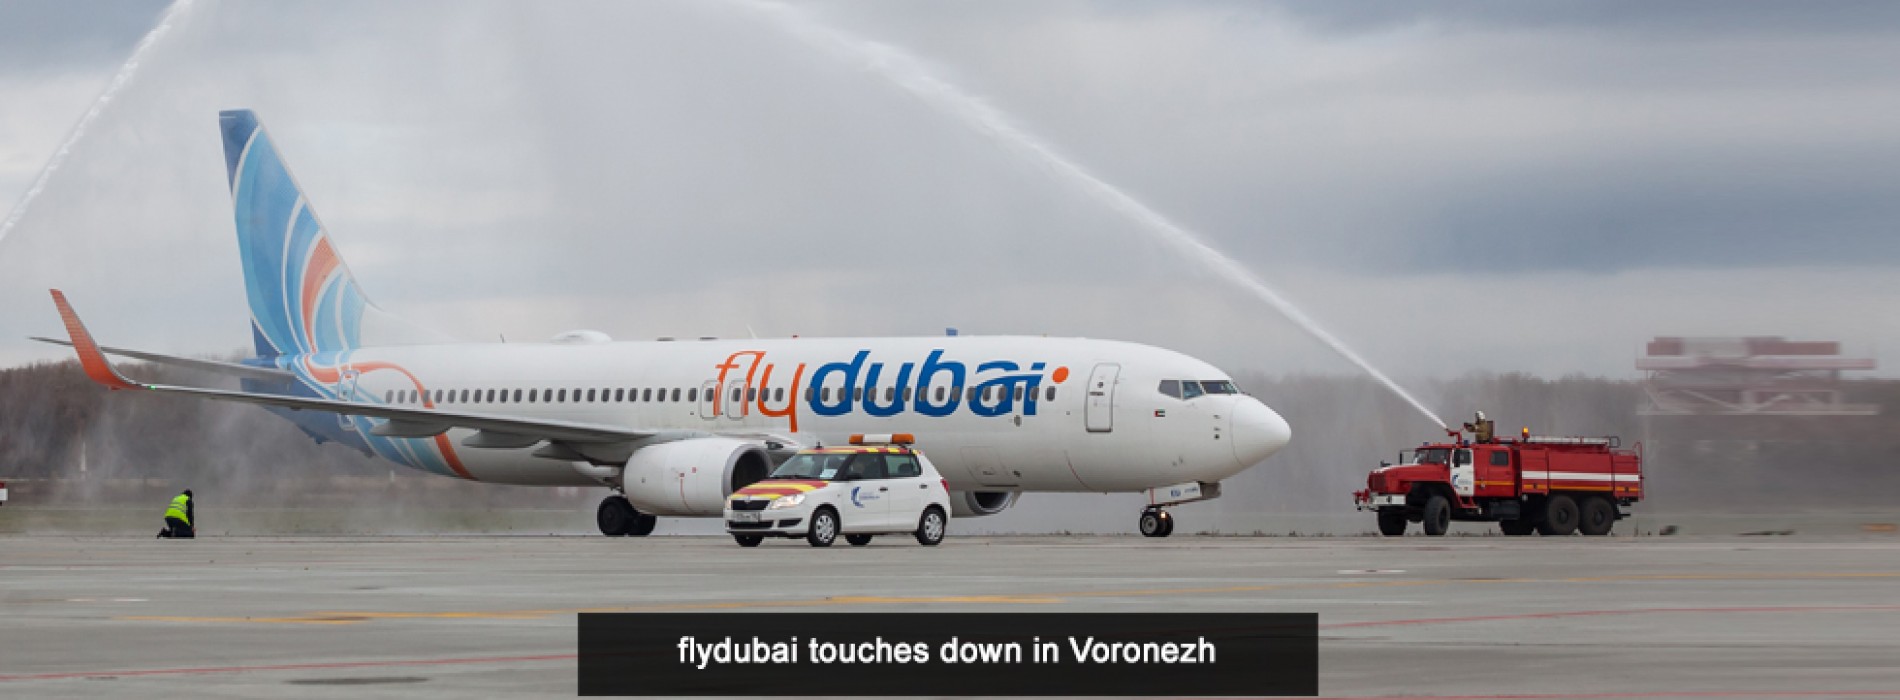 flydubai the first airline from the UAE to operate direct air links to Makhachkala and Voronezh